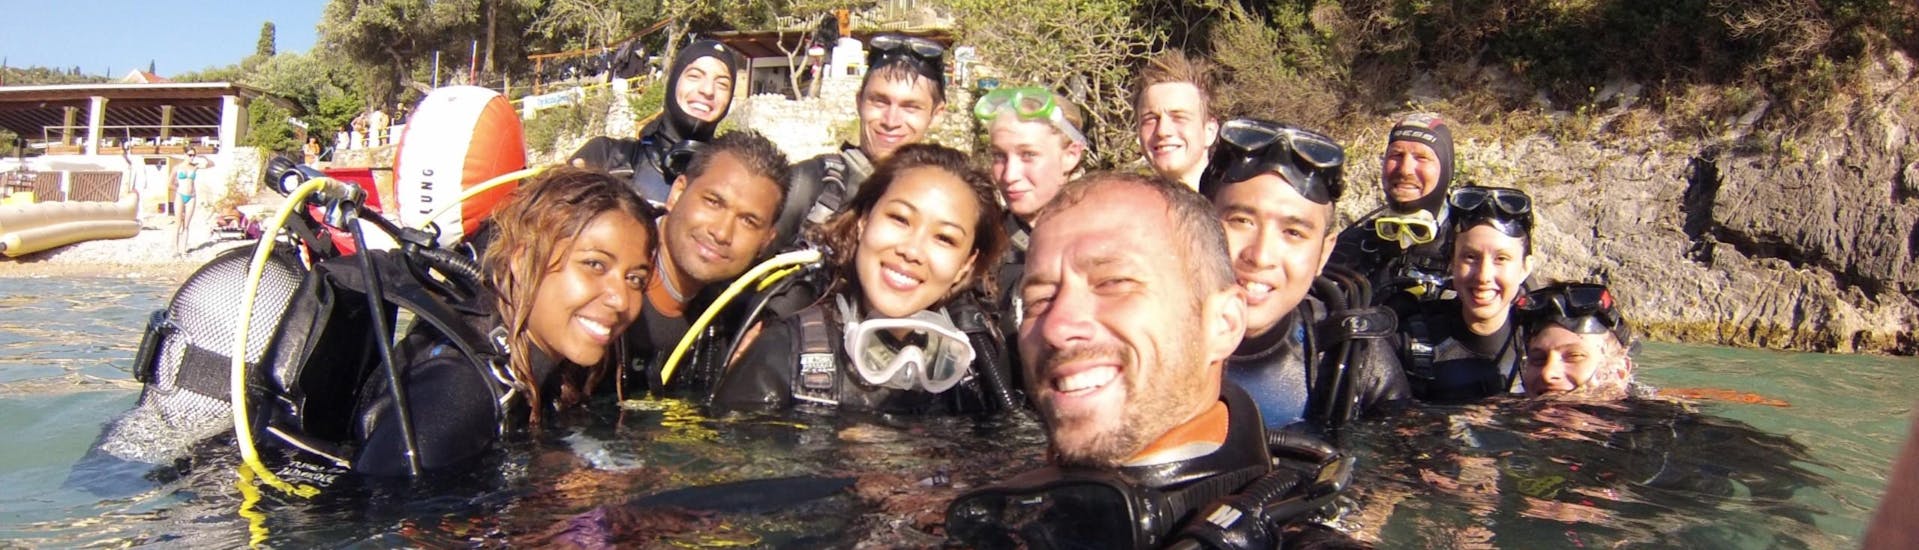 A diving instructor from Achilleon Diving Center Corfu is taking a selfie with a group of people taking part in the PADI Scuba Diver Course in Paleokastritsa for Beginners.